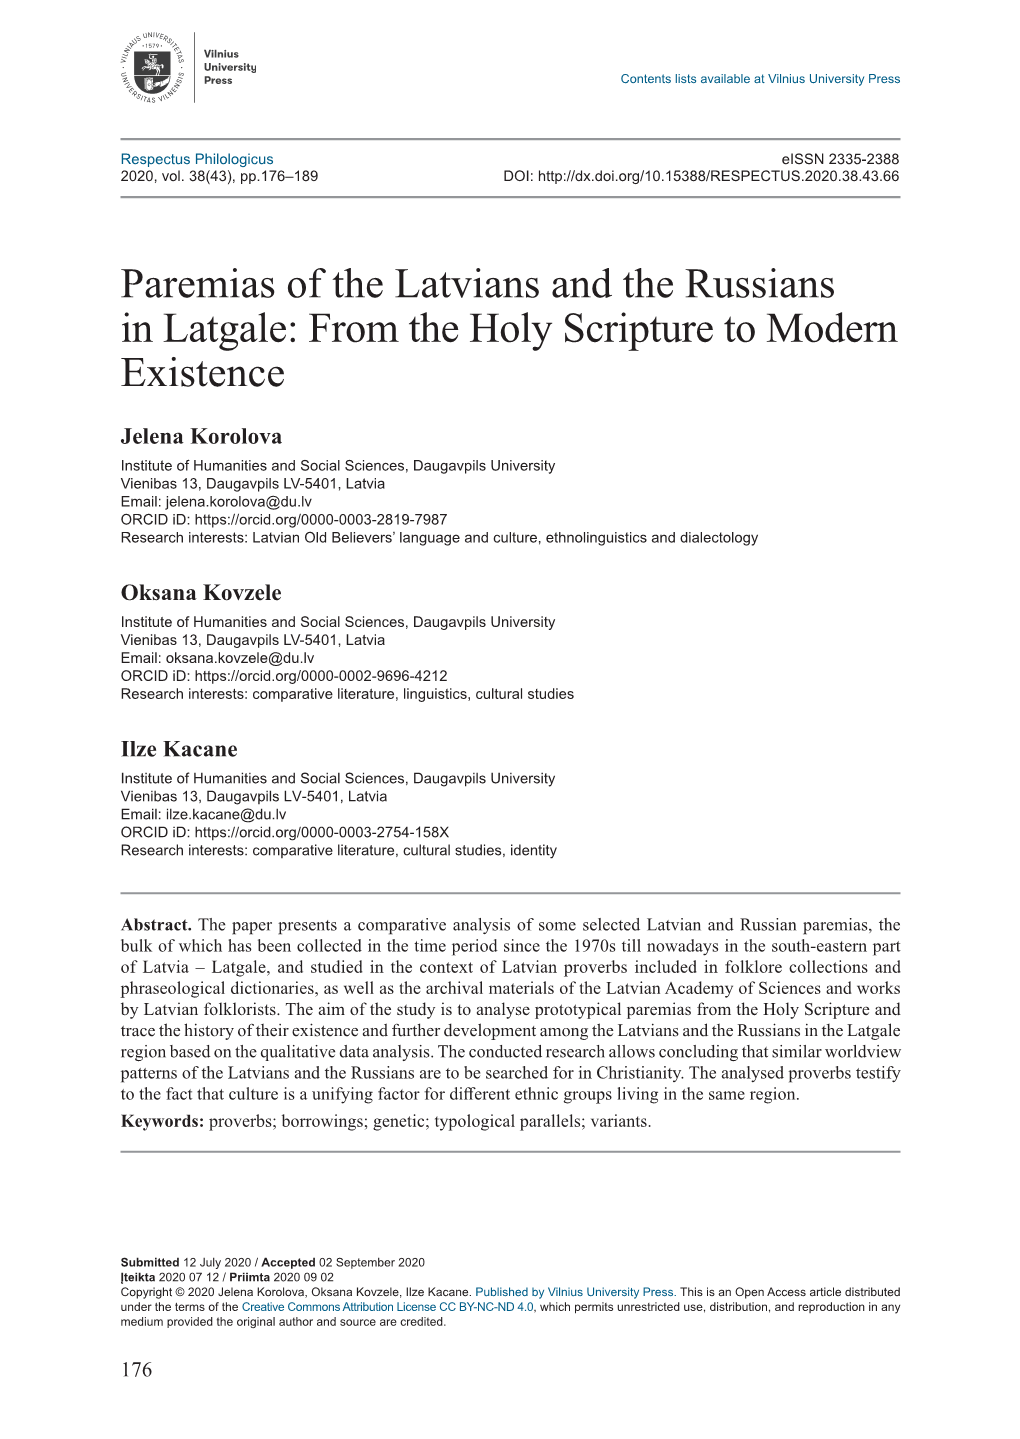 Paremias of the Latvians and the Russians in Latgale: from the Holy Scripture to Modern Existence